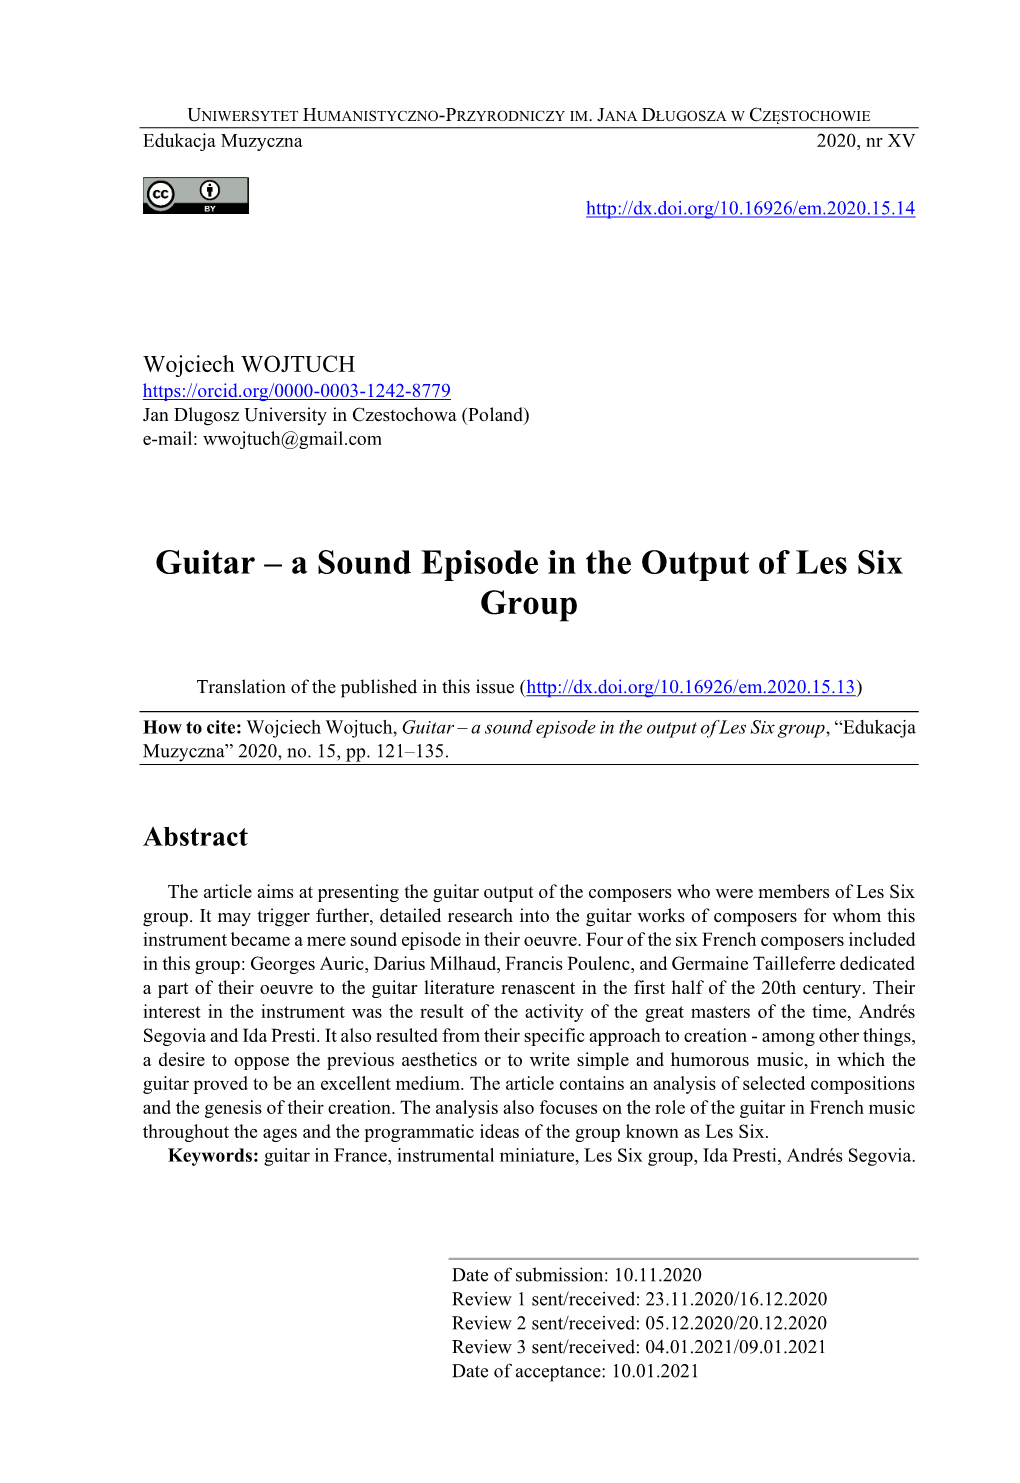 Guitar – a Sound Episode in the Output of Les Six Group